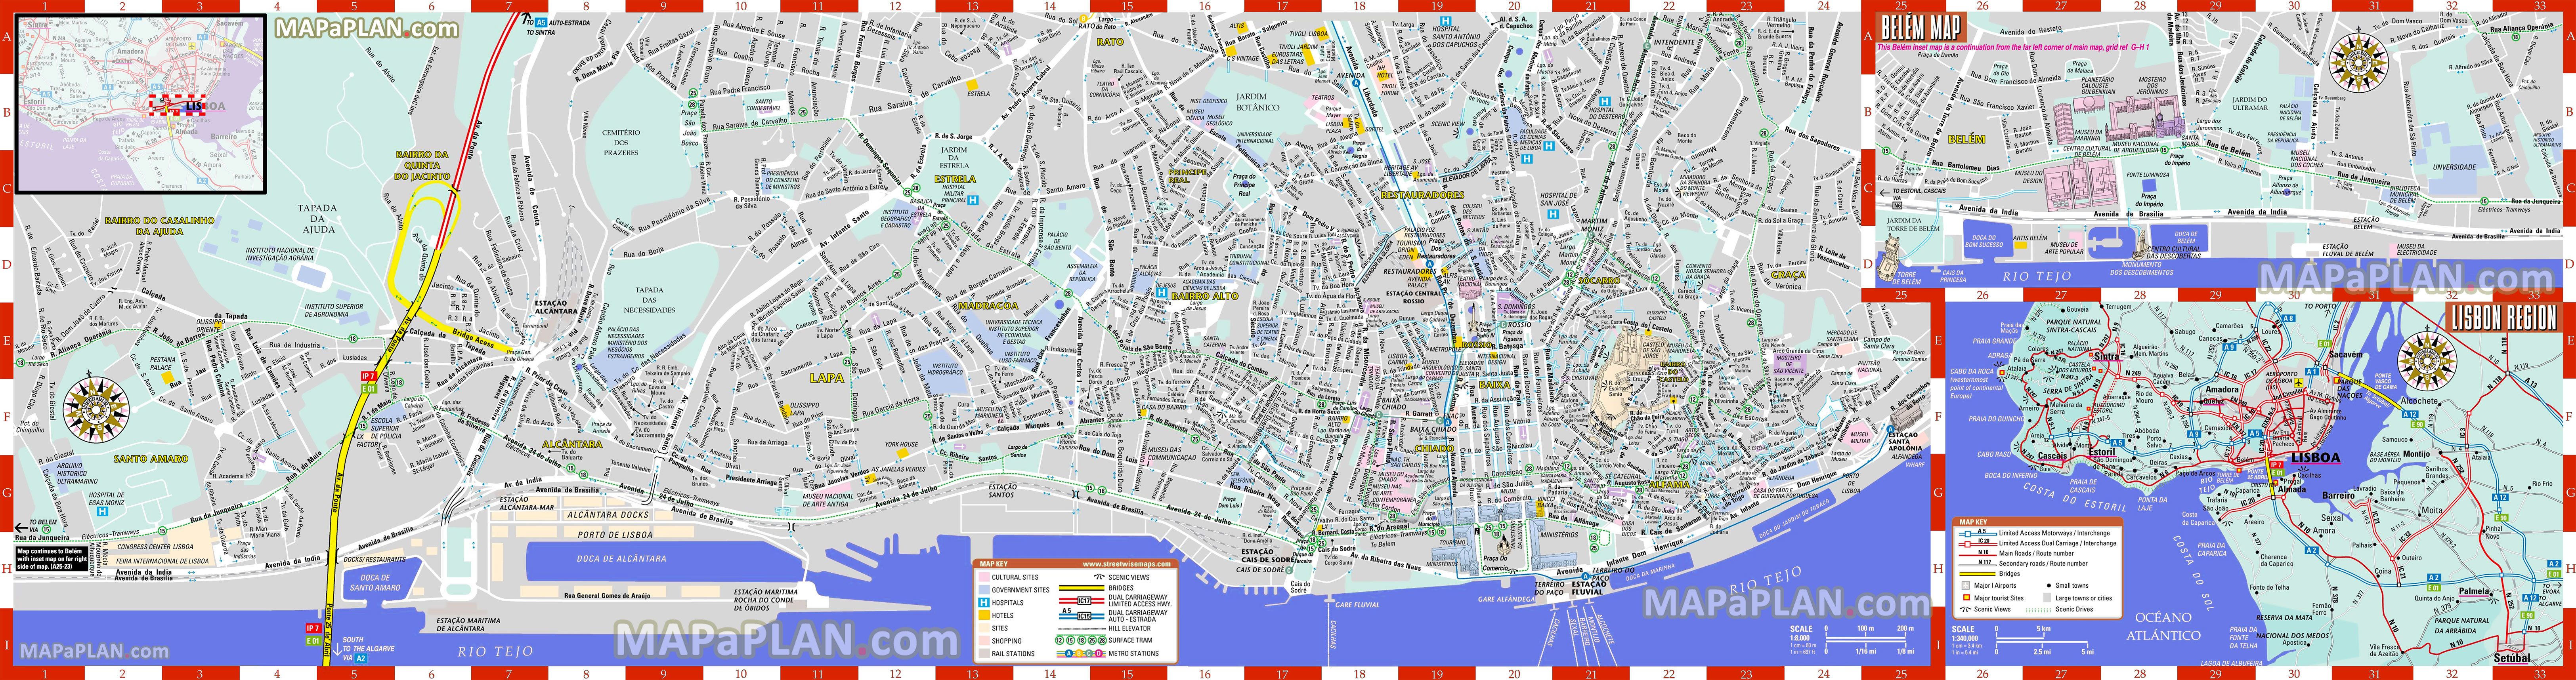 Maps of best attractions in Lisbon Portugal